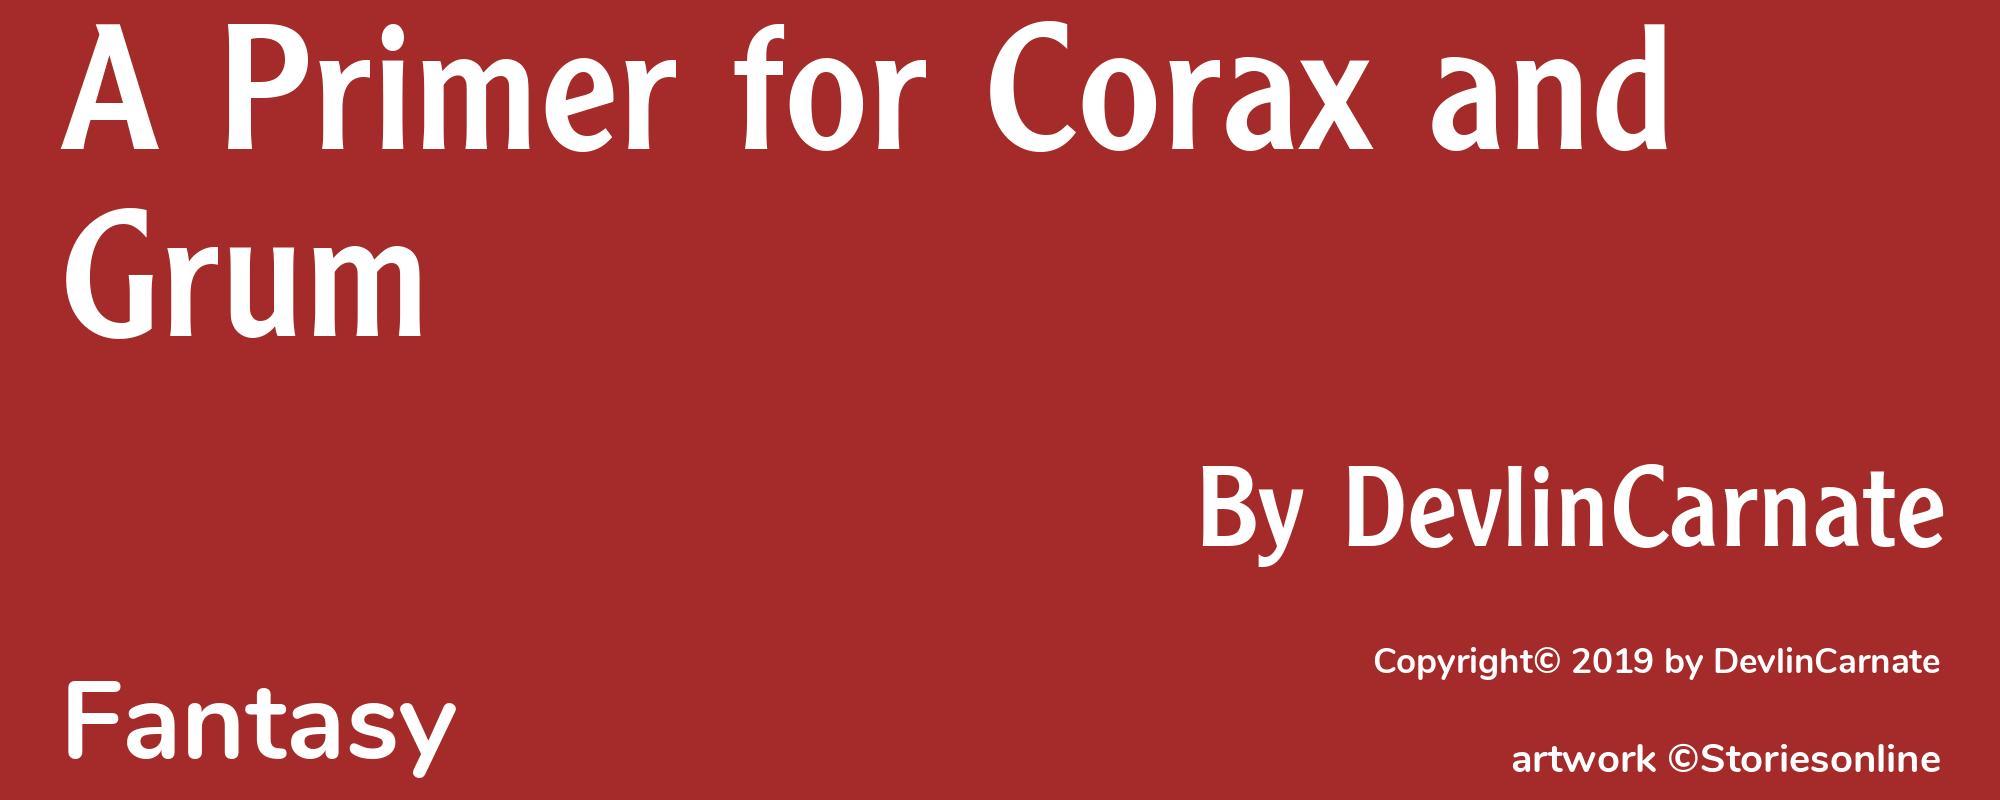 A Primer for Corax and Grum - Cover